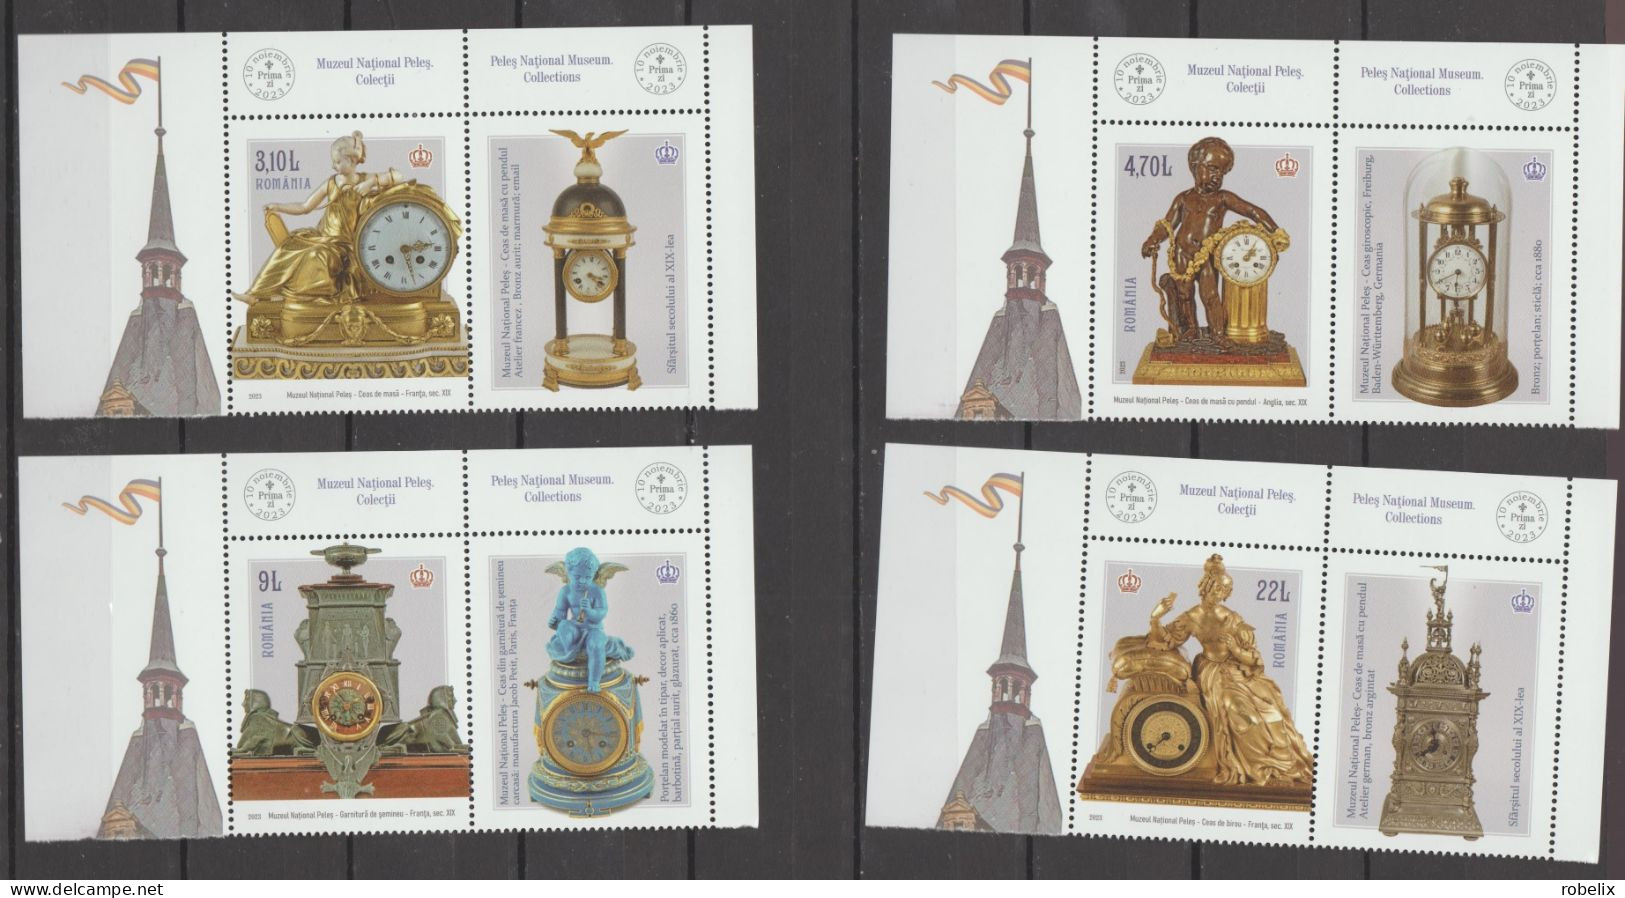 ROMANIA 2023  PELEȘ NATIONAL MUSEUM - COLLECTIONS - CLOCKS  Set Of 4 Stamps With Labels  MNH** - Horlogerie